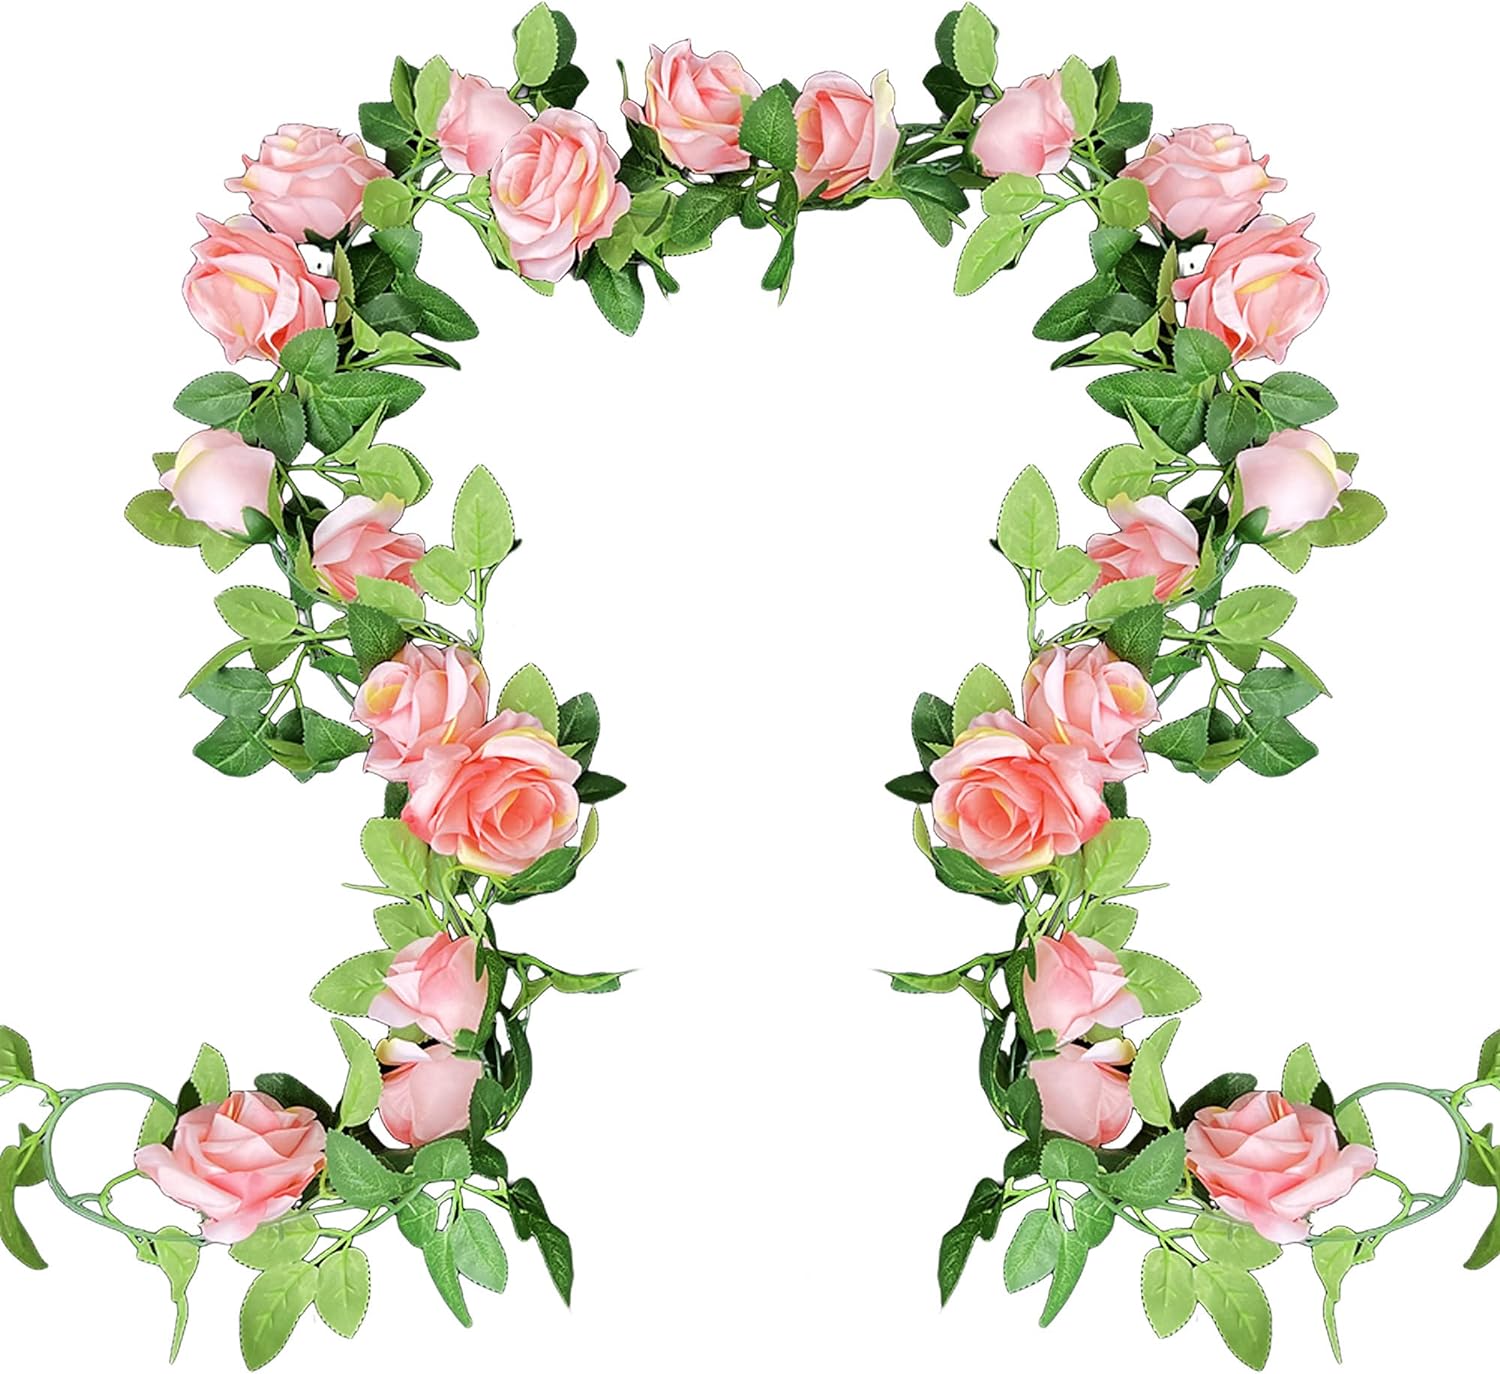 UKELER 2 Pack Artificial Flowers Garland Total 14FT Pink Rose Vines Hanging Flower Plants for Home Garden Party Outdoor Ceremony Wedding Arch Floral Decor